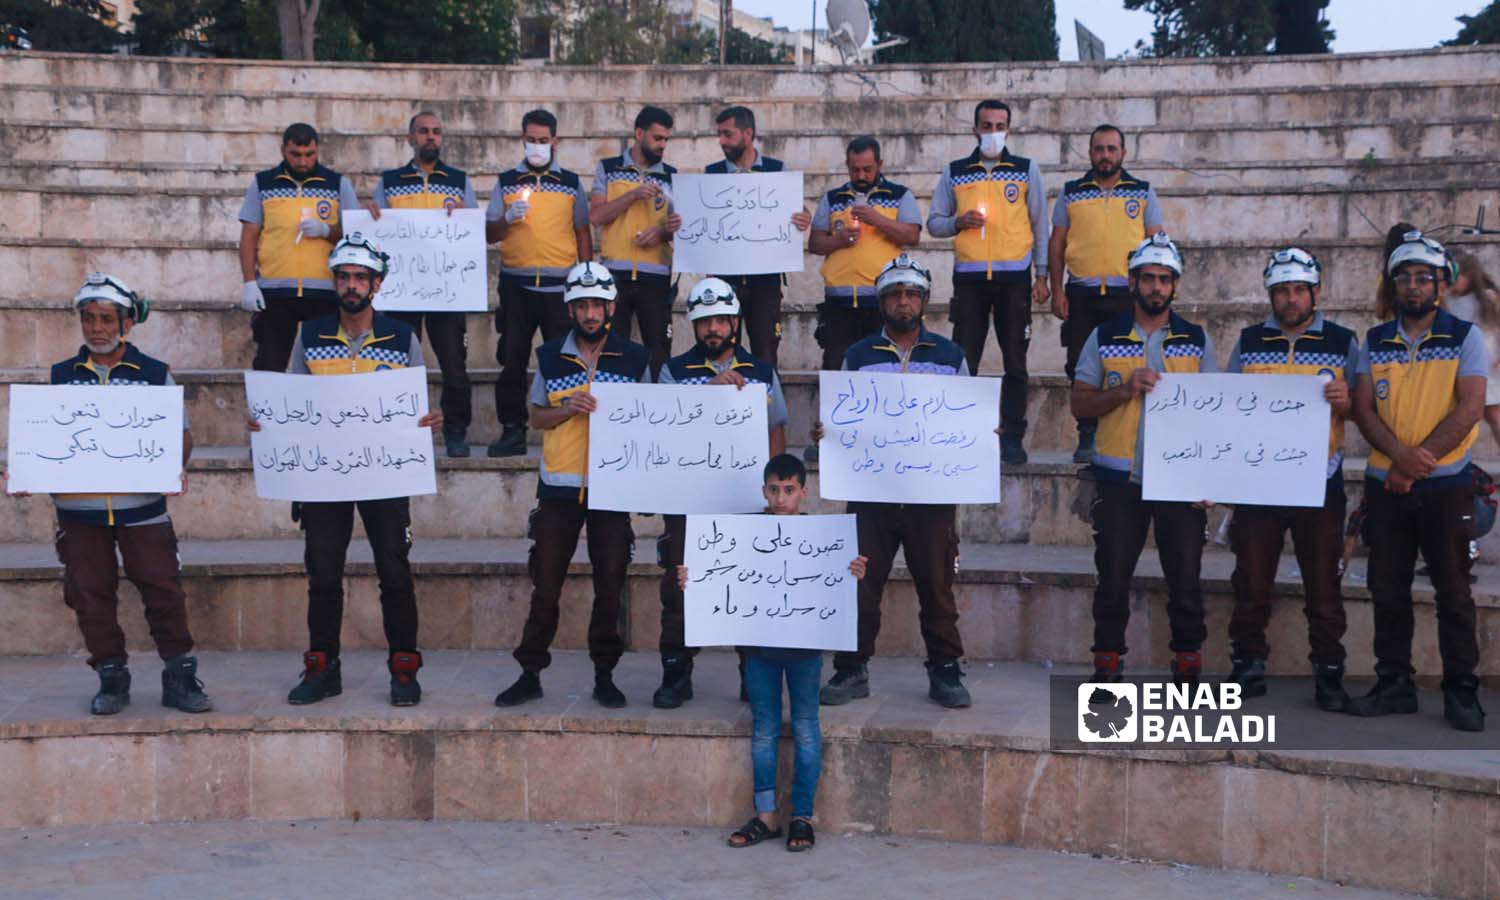 Syria Civil Defense volunteers in the city of Idlib hold banners calling for an investigation into the reasons for the sinking of a refugee boat on the coast of Greece - June 18, 2023 (Enab Baladi/Anas al-Khouli)